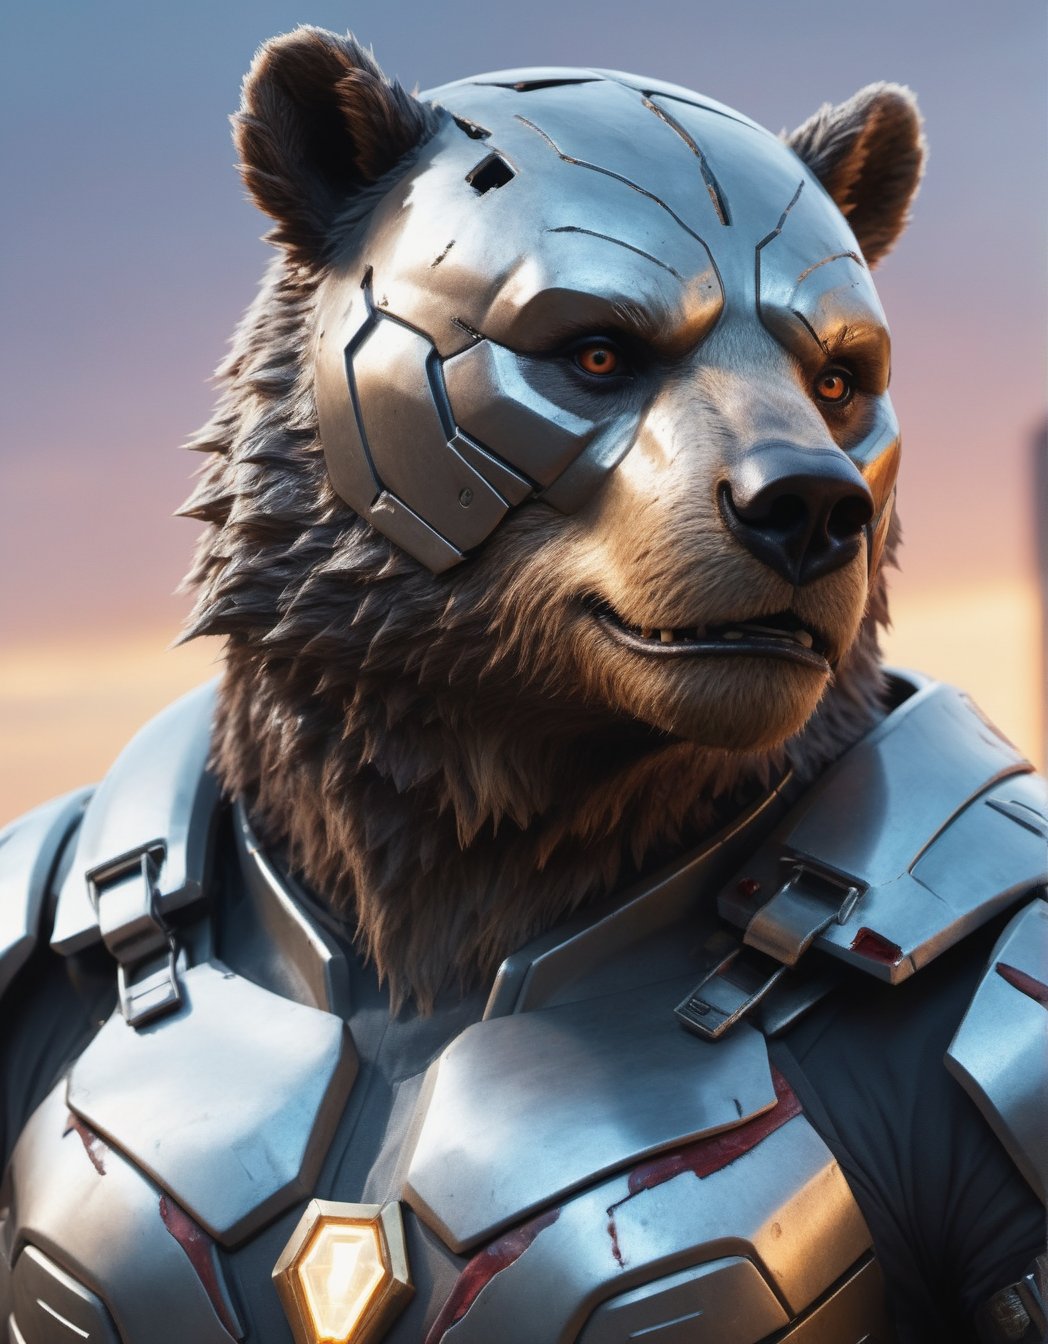 hyper-detailed (dynamic Photographic ultra close up) from (different angles) of a futuristic bear soldier with an (ultra-realistic appearance), (Enhancer textures), (Enhancer anatomy), intrinsic details of your skin and a fierce expressionin with worn metallic futuristic armor, Distressed and damaged appearance, signs of struggle, (Marvel style), in a dystopian urban setting, at sunset, (vivid colors), (perfect contrast), (better lightning),cinematic style,more detail XL